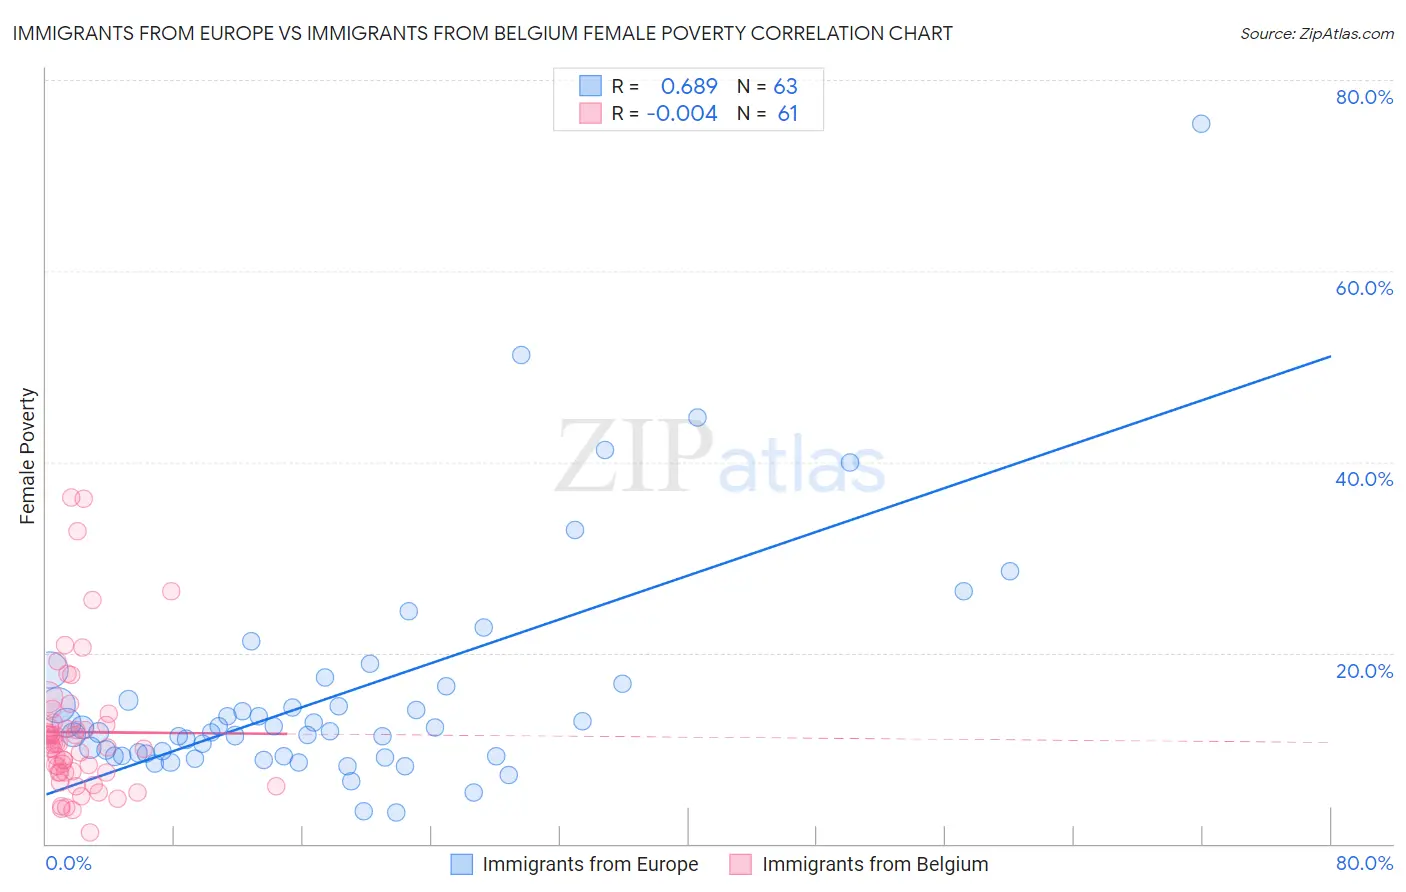 Immigrants from Europe vs Immigrants from Belgium Female Poverty